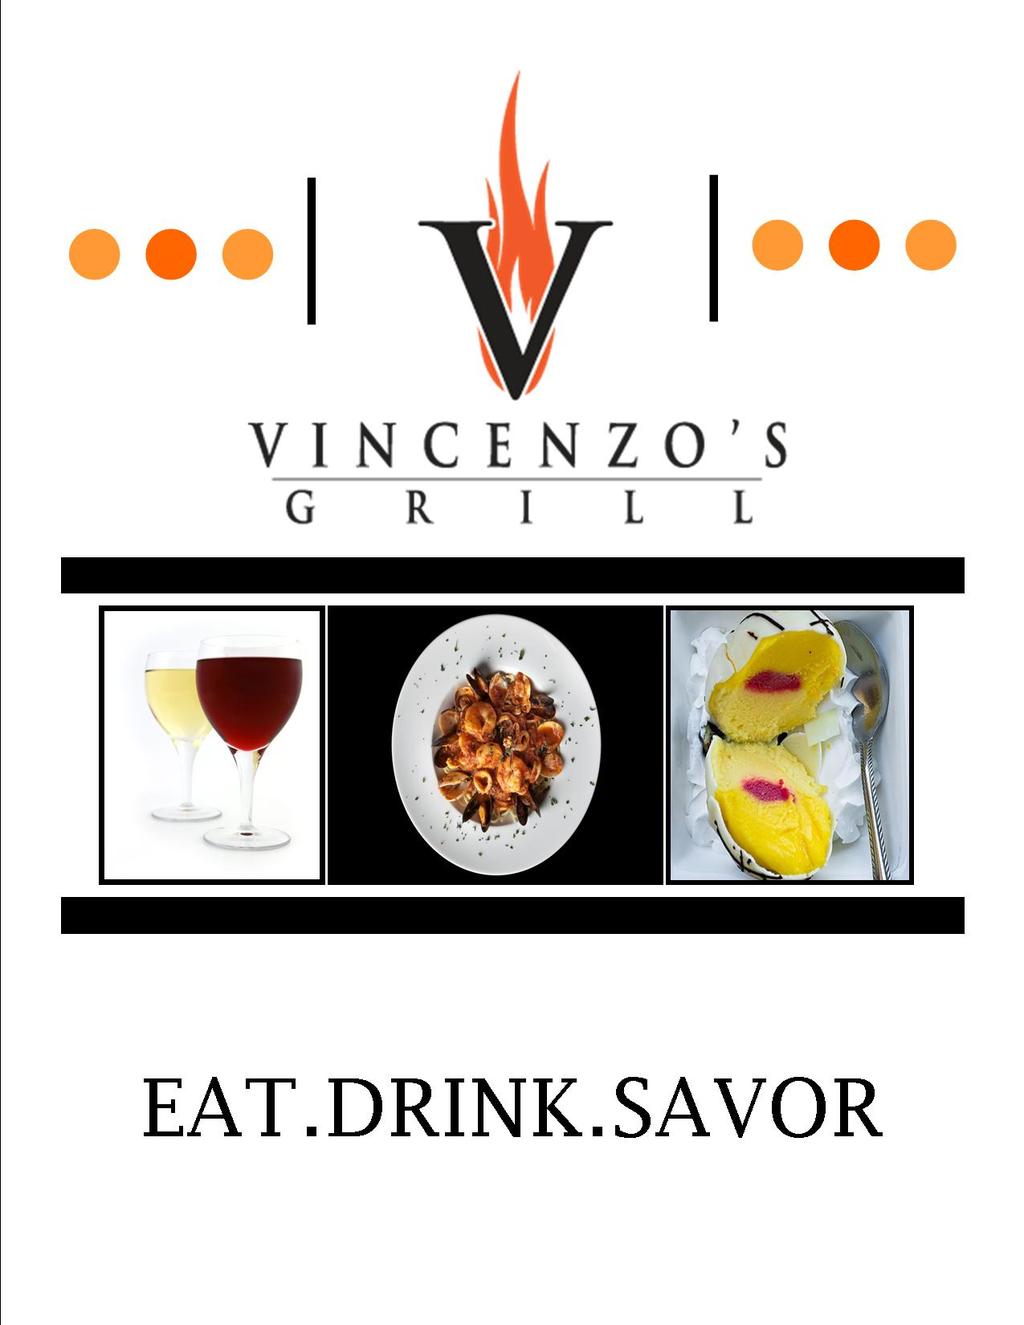 Vincenzo s Grill features regionally diverse Italian cuisine, conveniently located off the Great Room of the lobby floor in the St. Petersburg Marriott Clearwater.